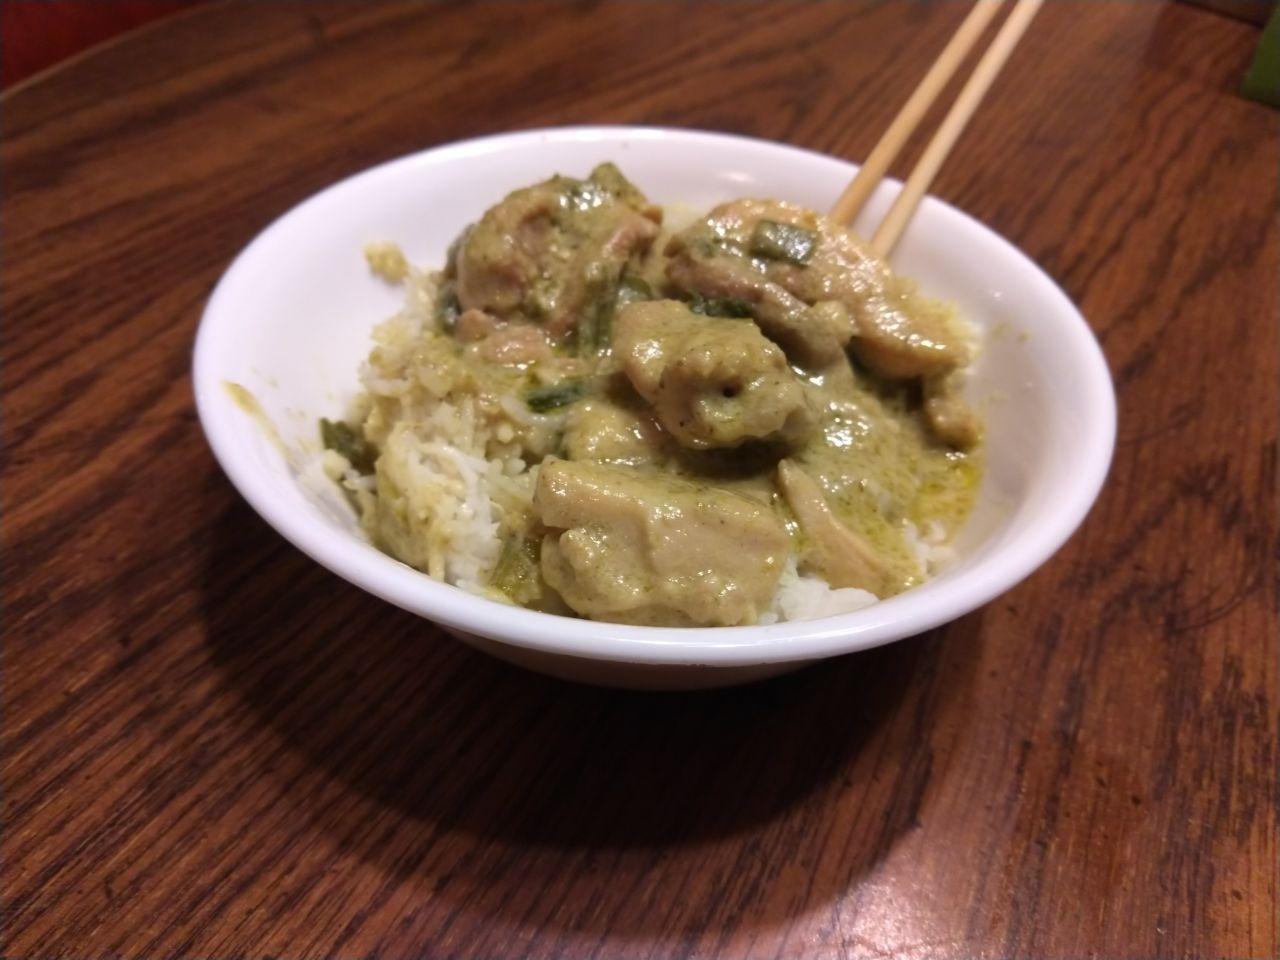 Bowl of green curry on rice.